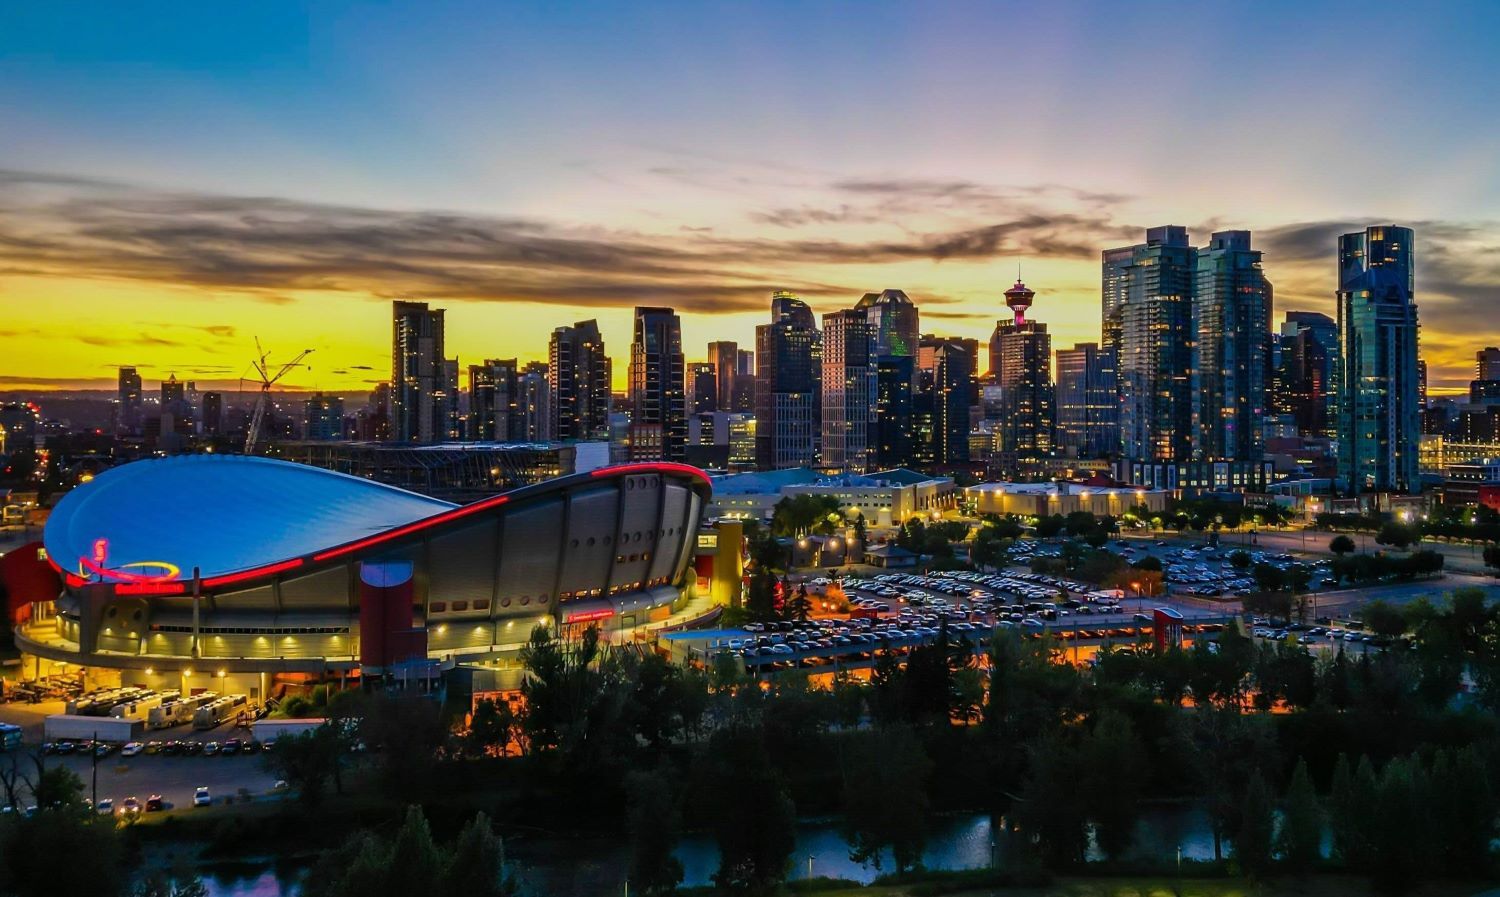 A view of a bright downtown landscape at sunset features an arena with a white saddle-shaped roof.